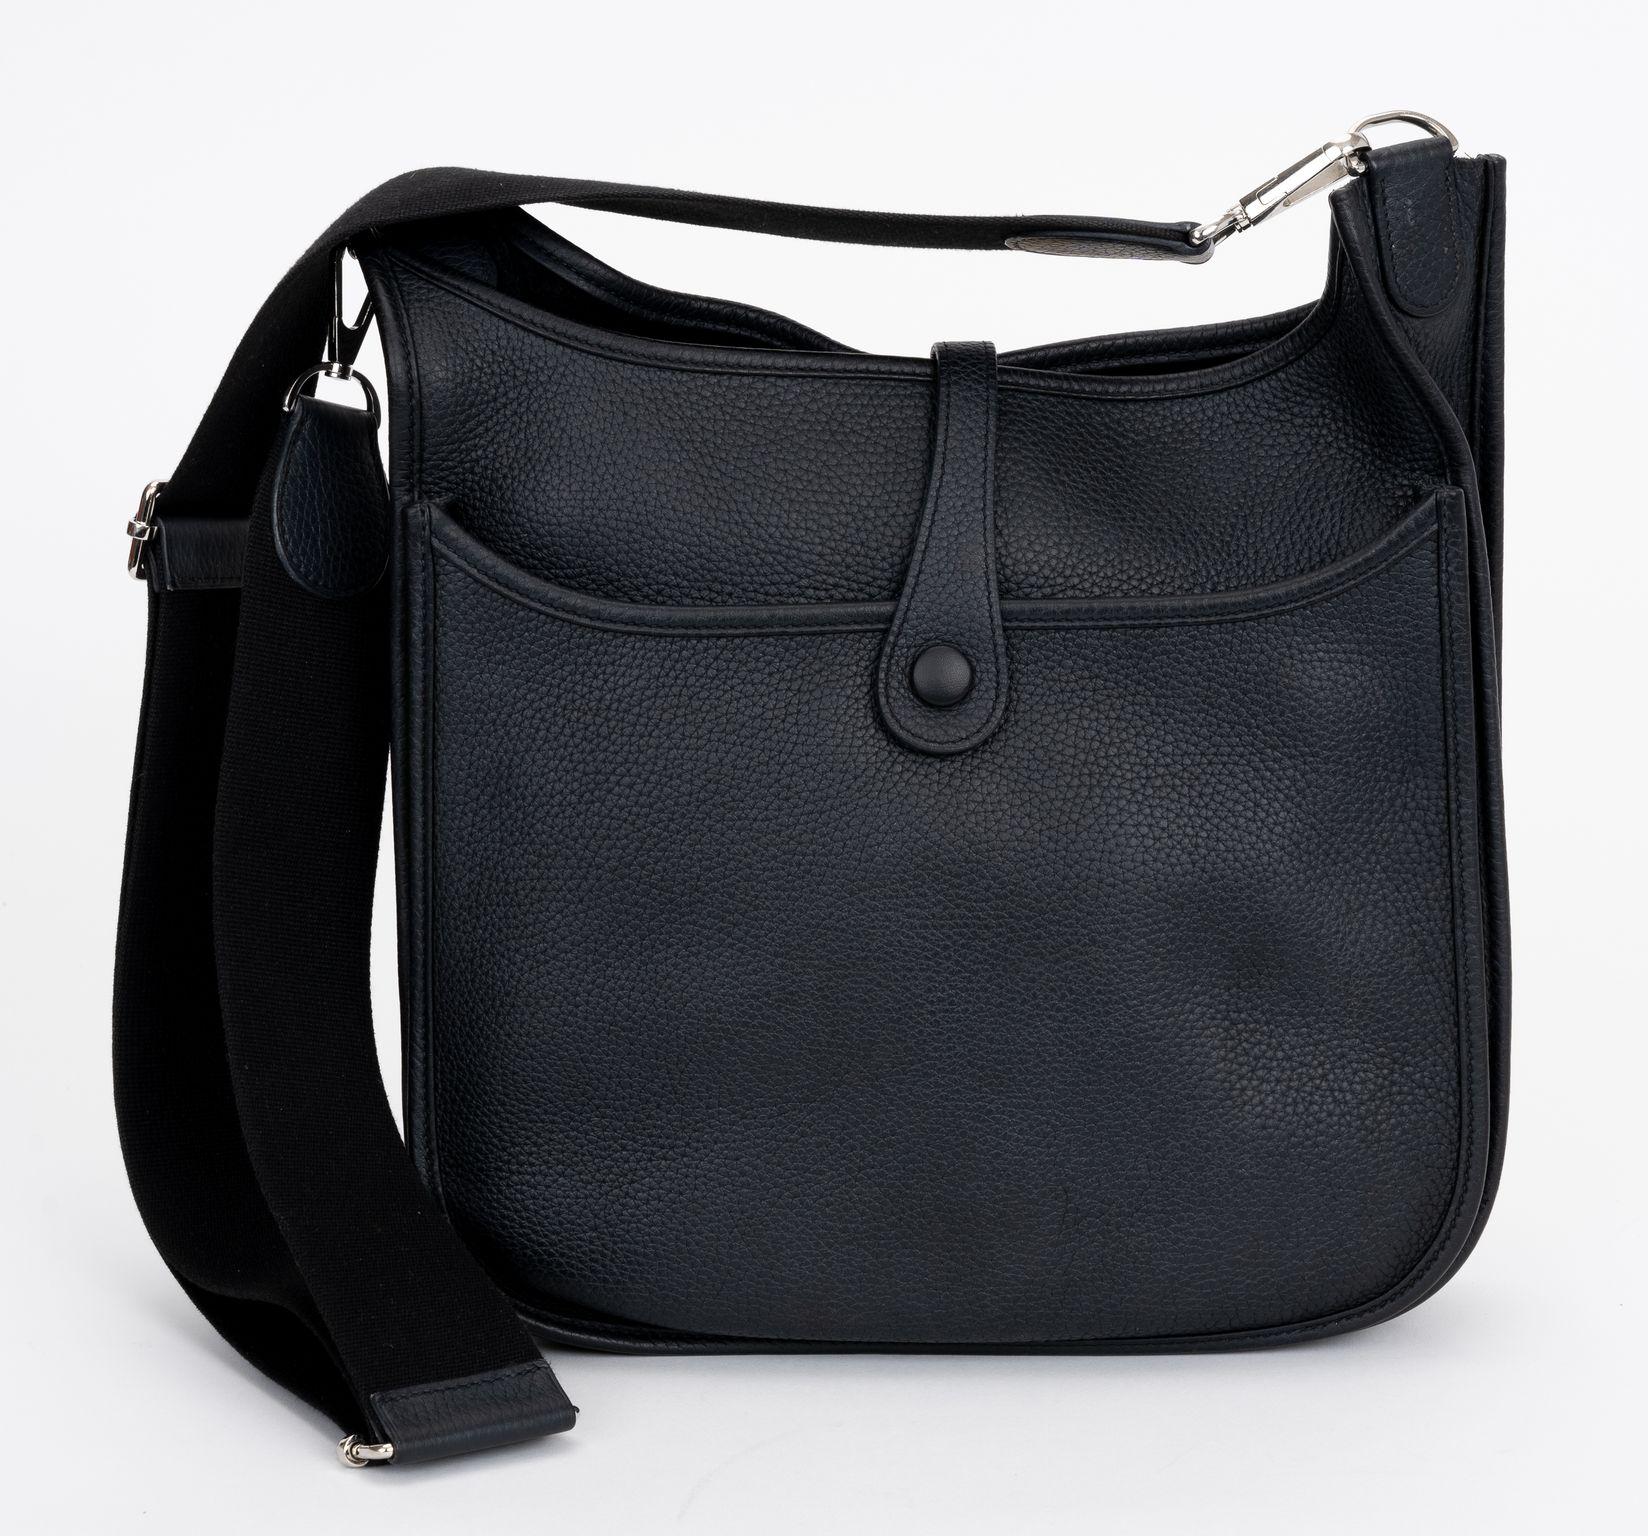 Hermes PM Clemence Black Evelyne Bag In Excellent Condition For Sale In West Hollywood, CA